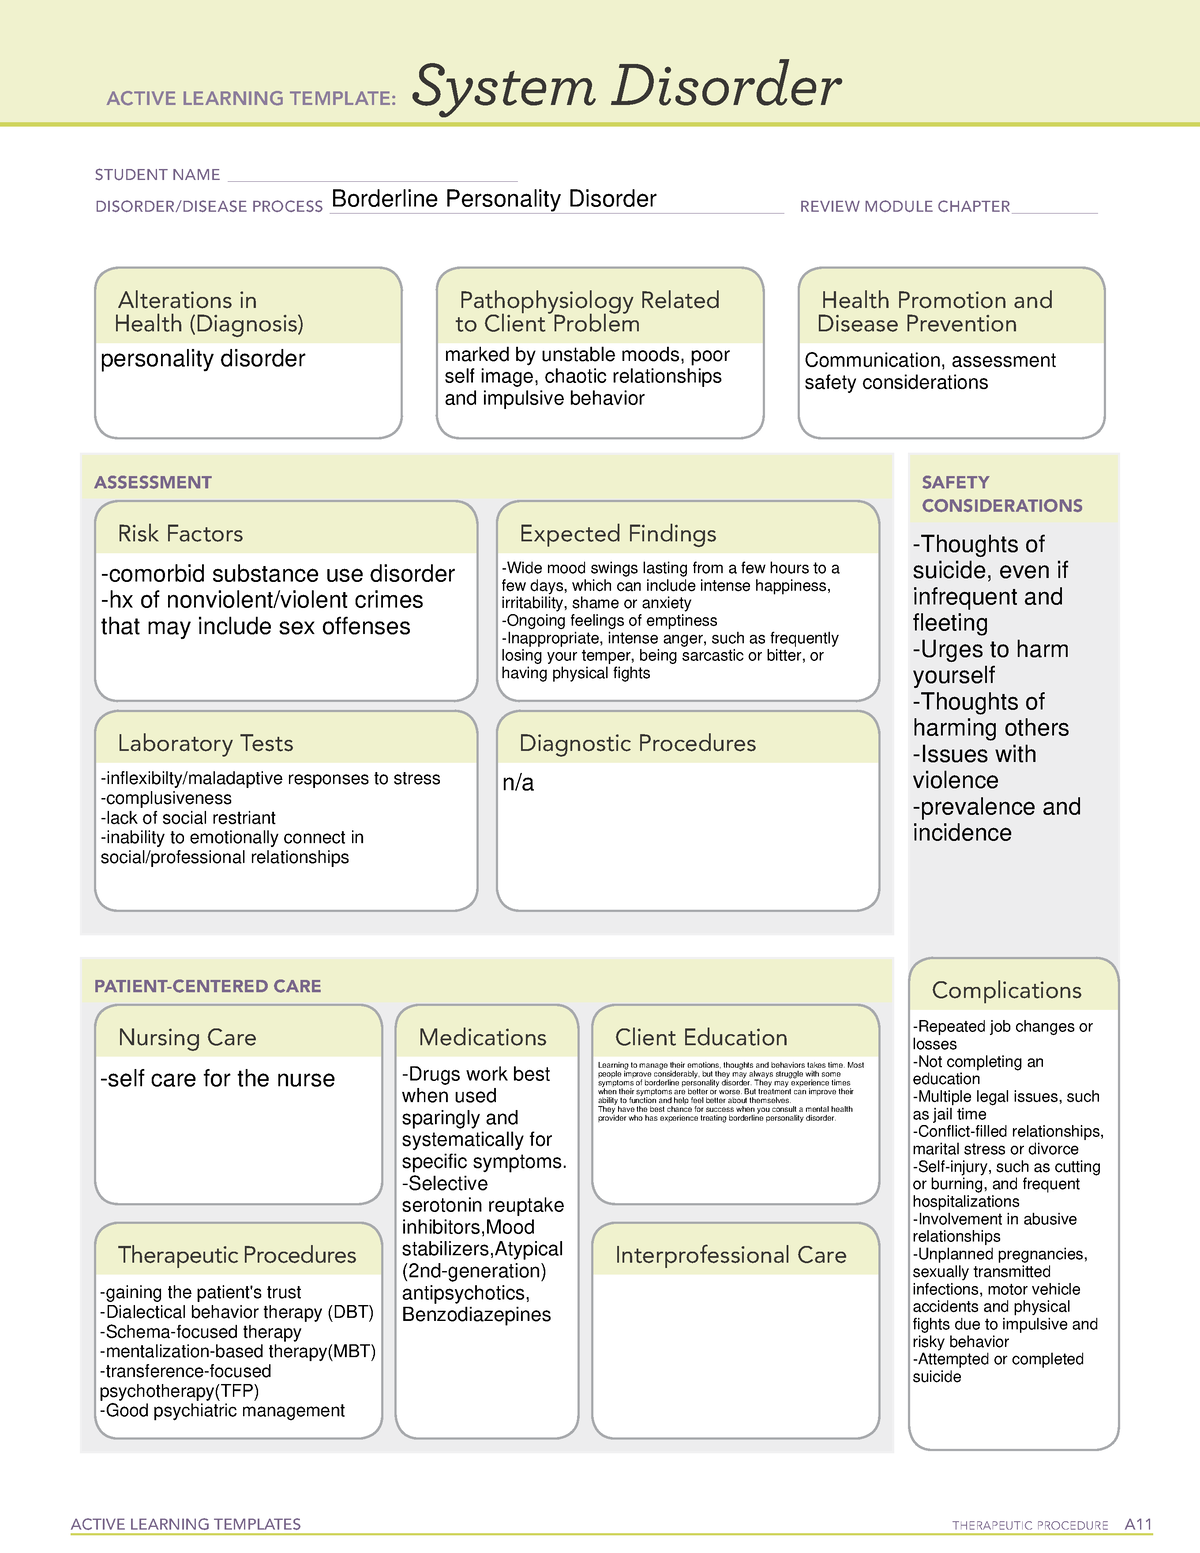 system-disorder-bpd-ati-active-learning-template-active-learning